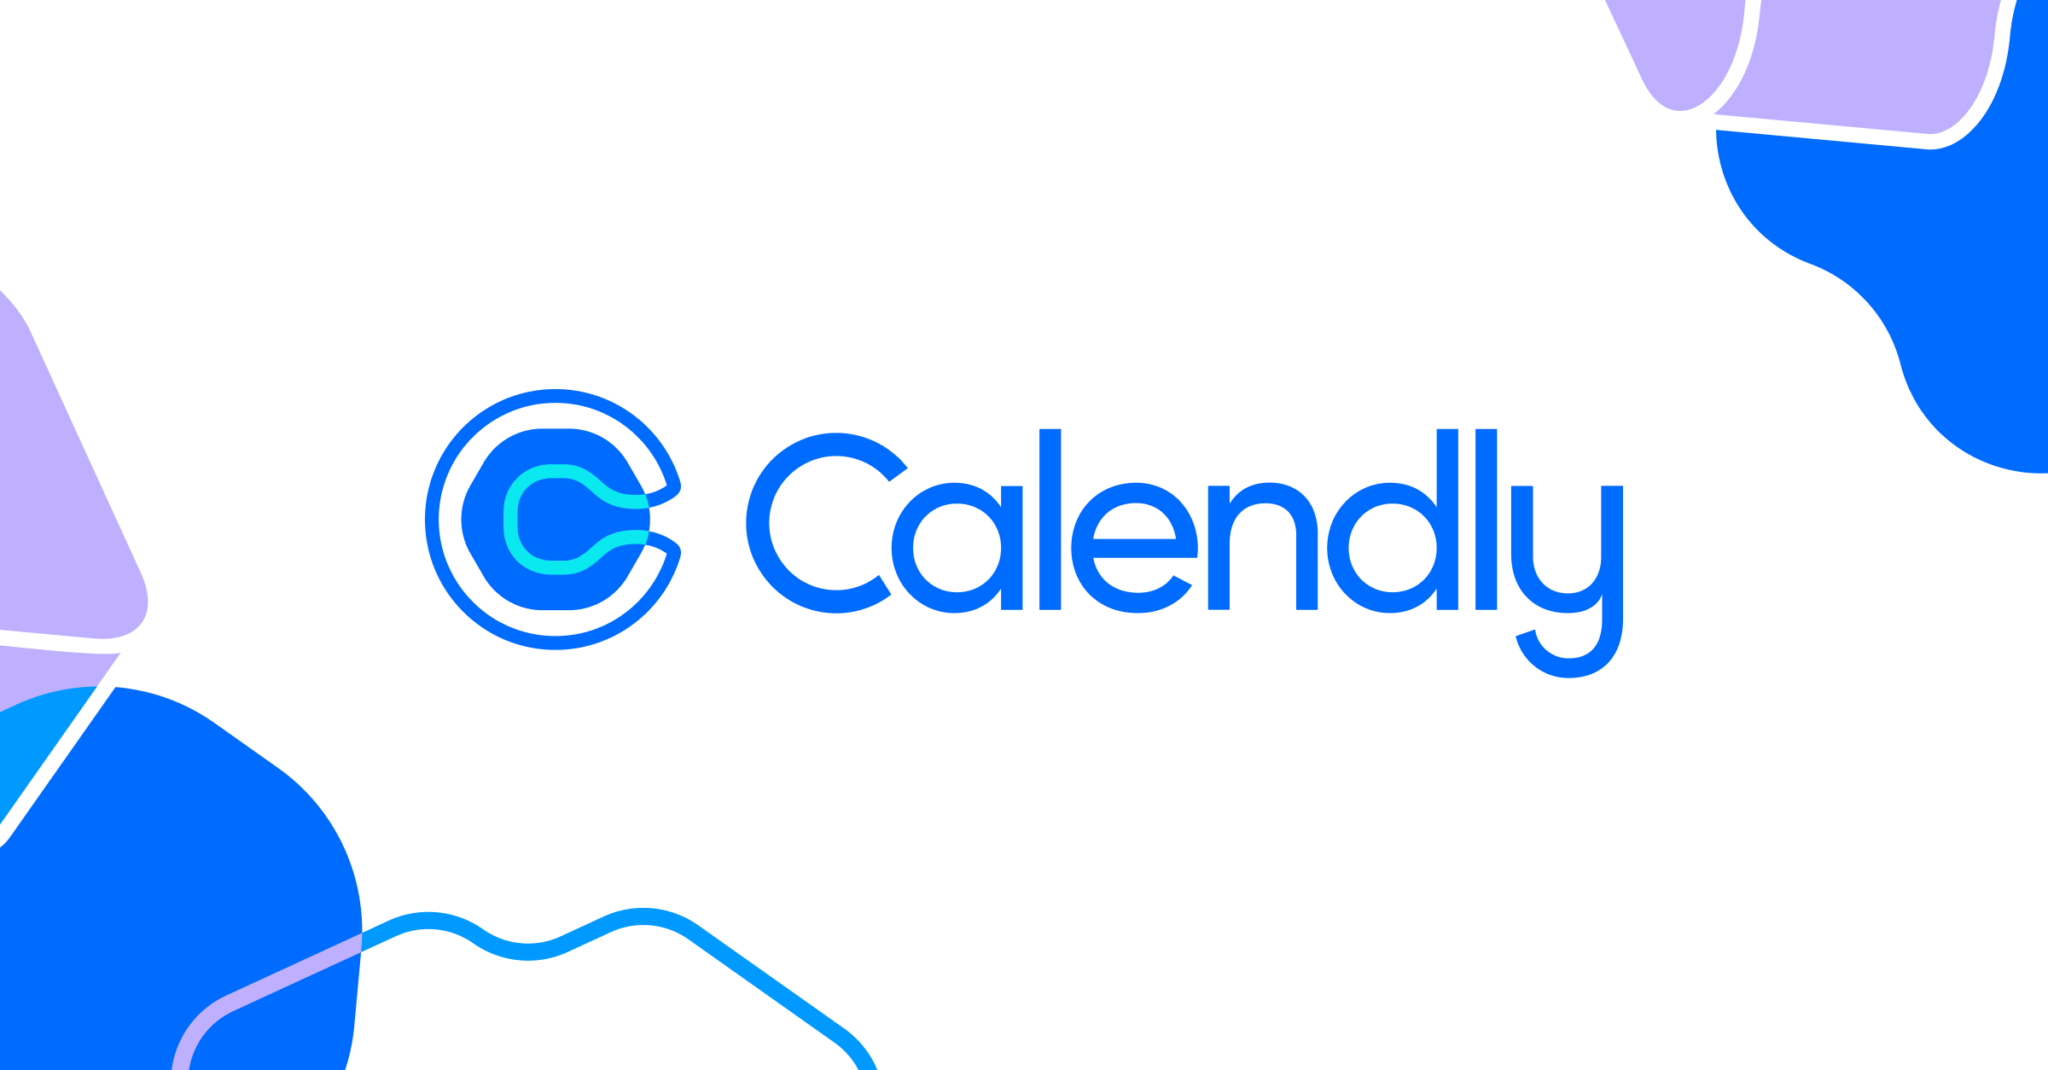 Sending automatic emails with single use Calendly links to schedule